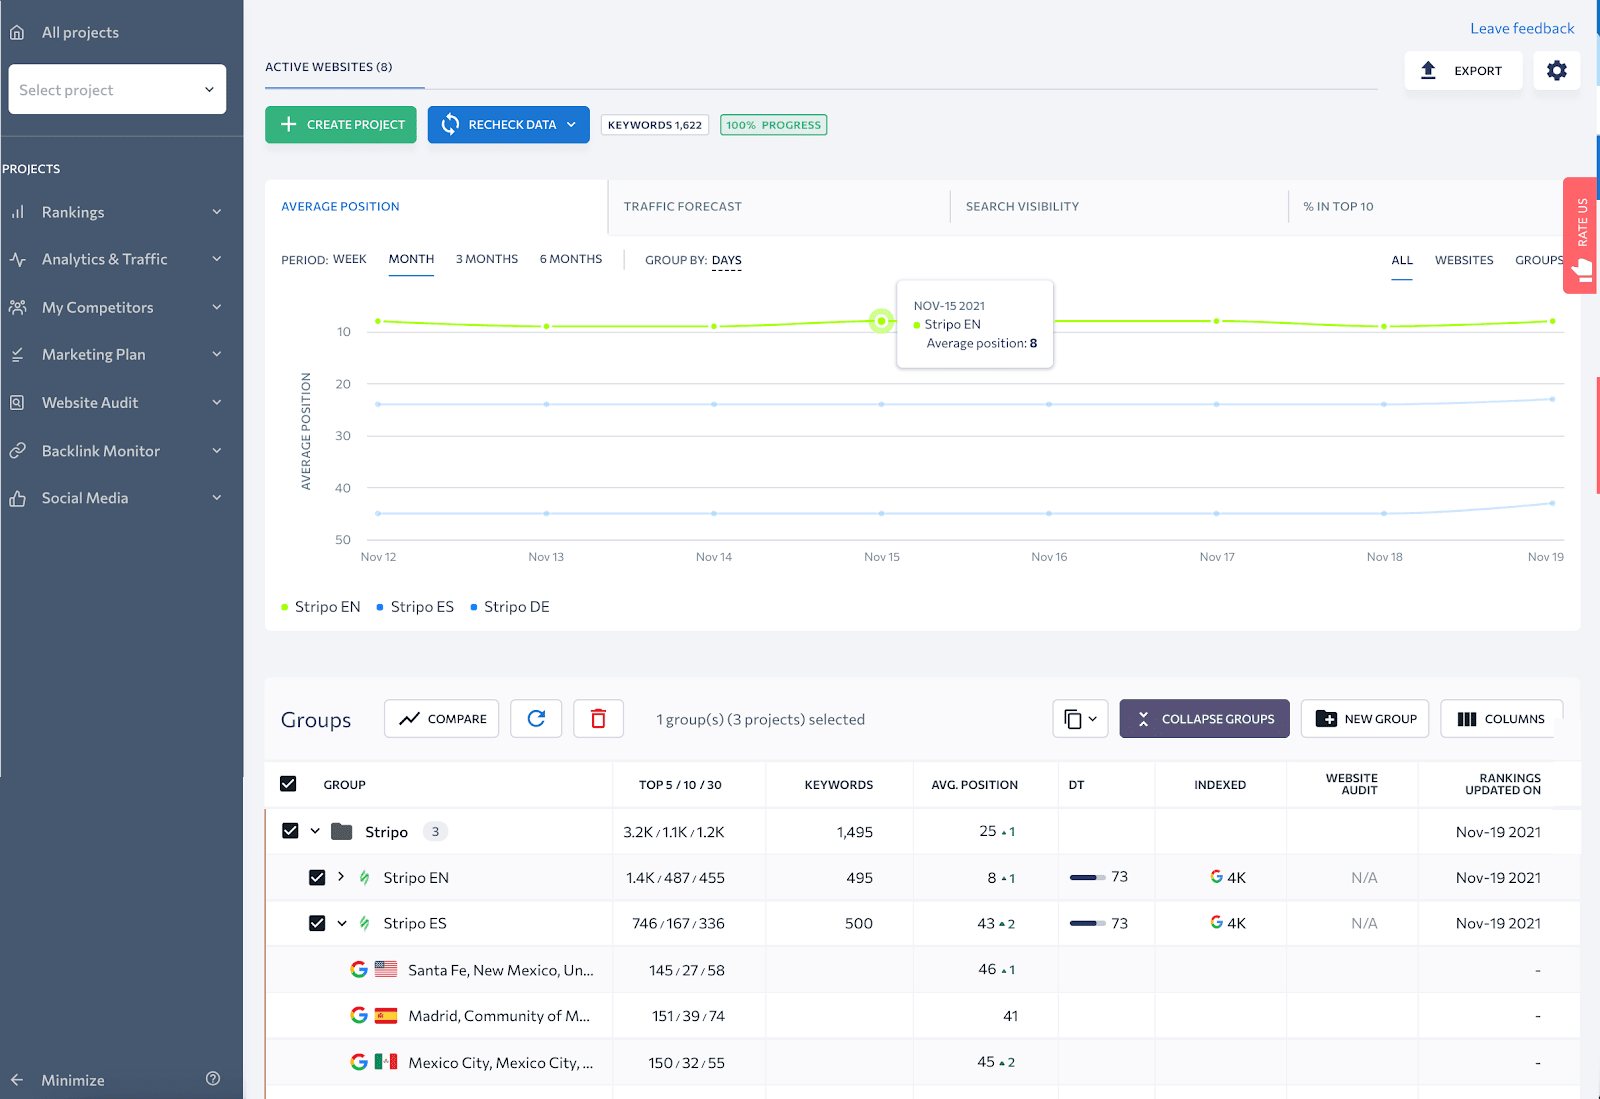 The All projects dashboard in SE Ranking